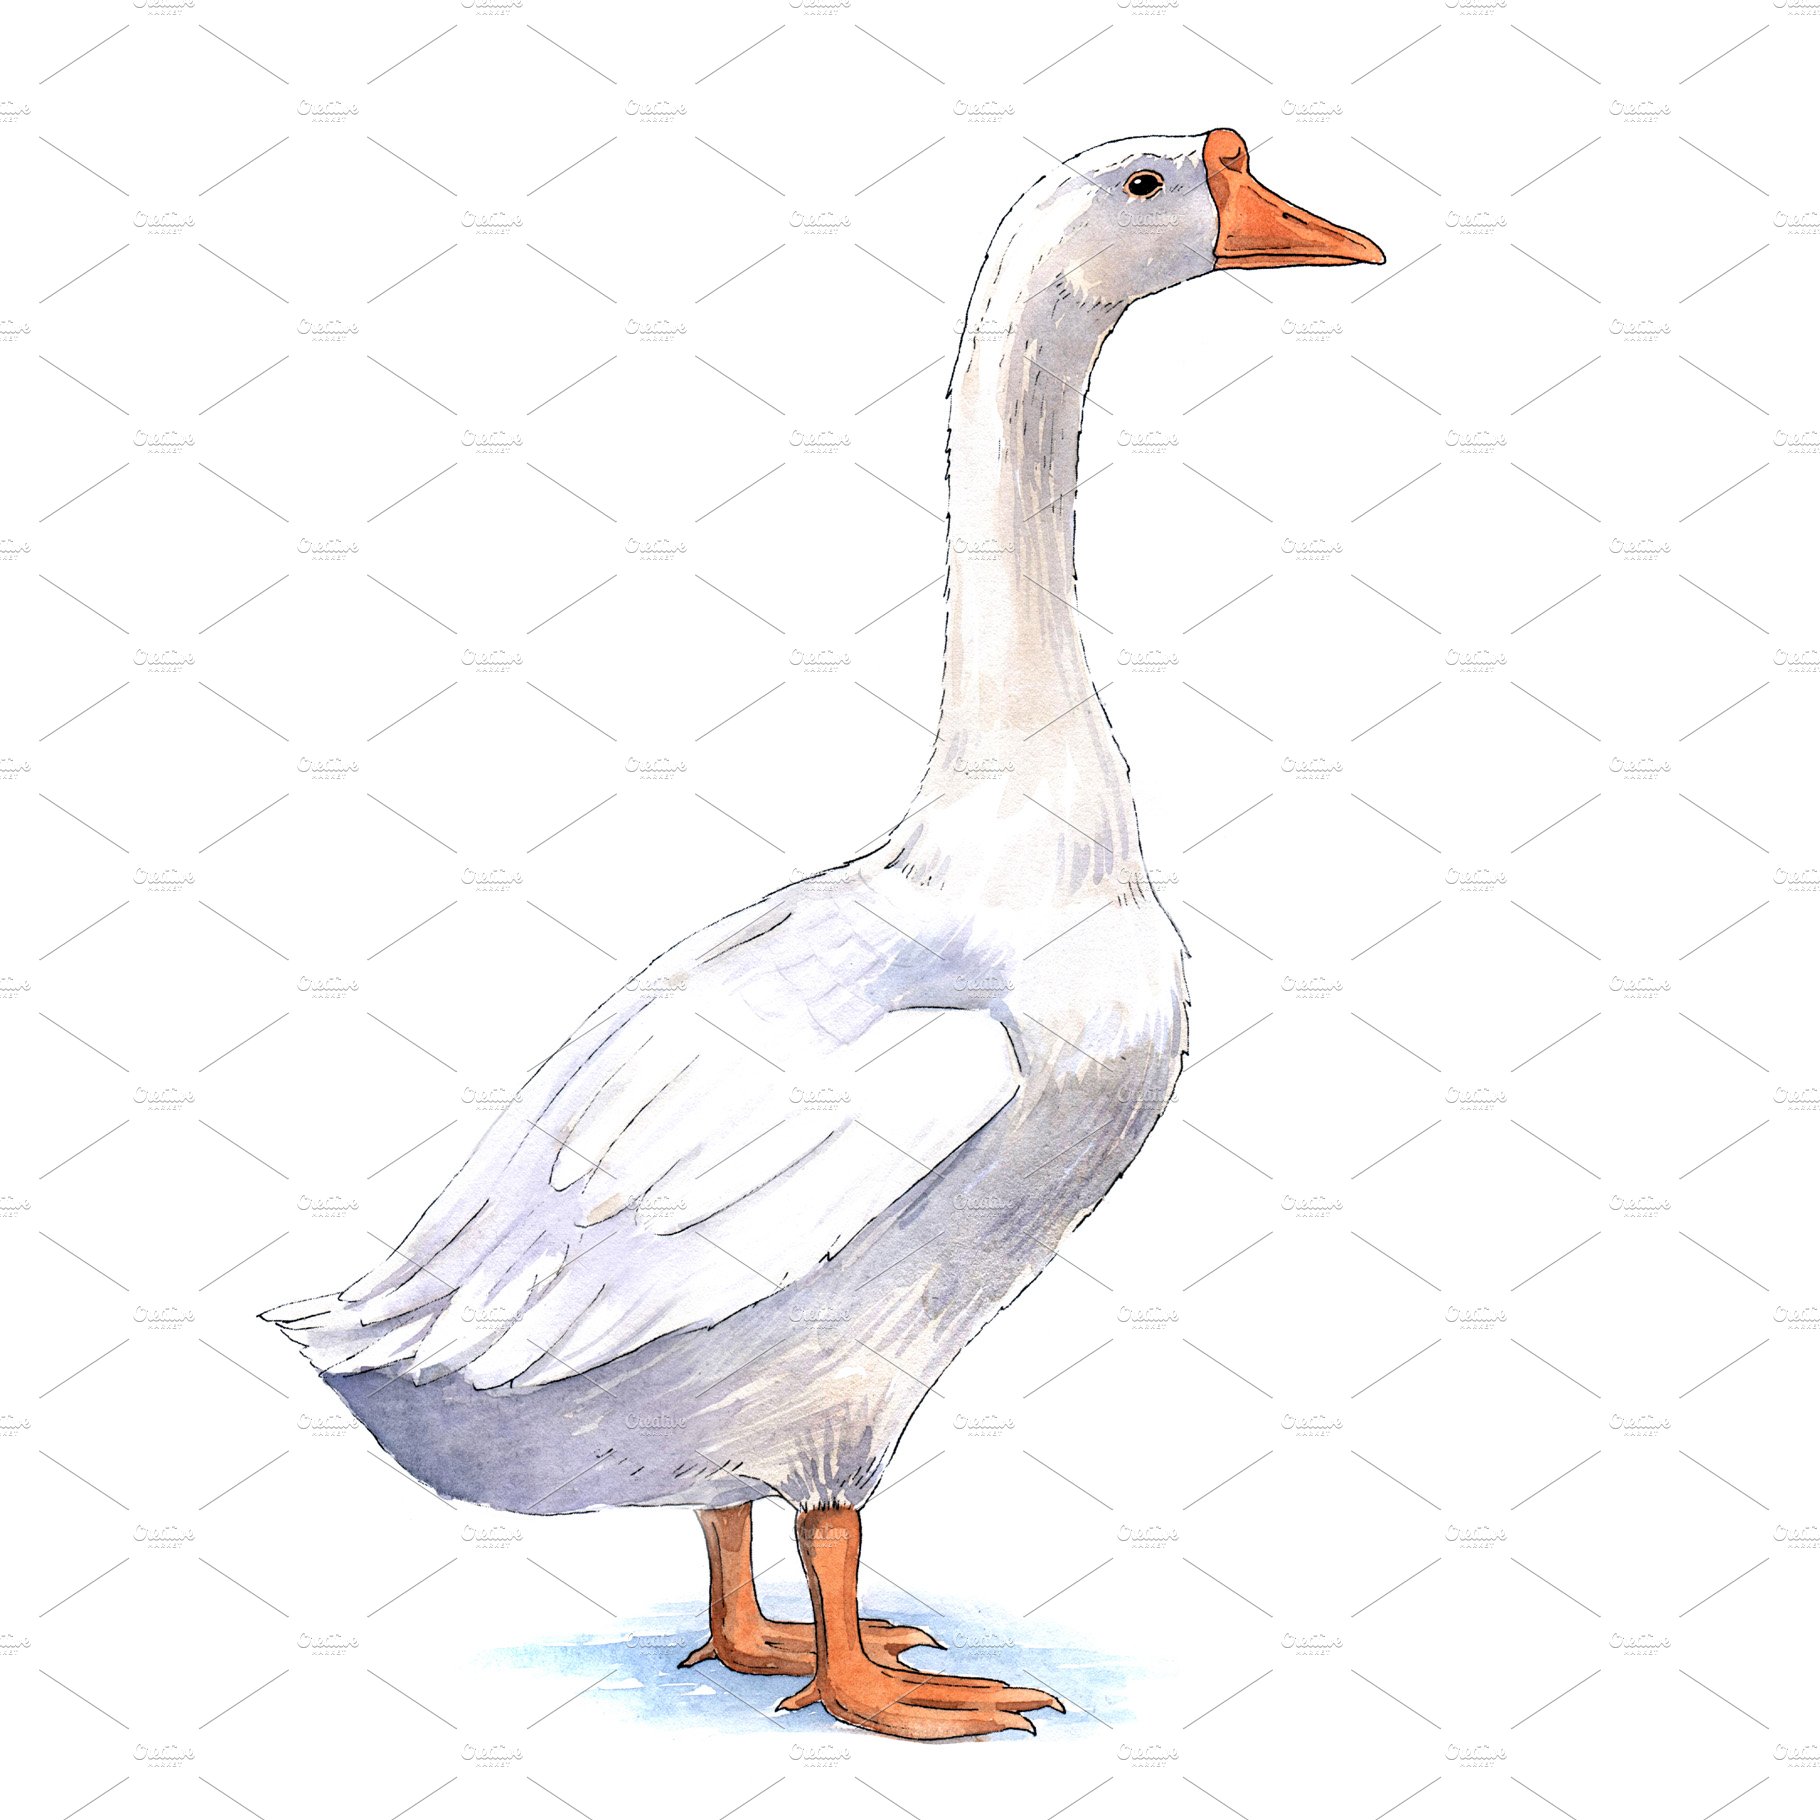 Goose watercolor illustration preview image.